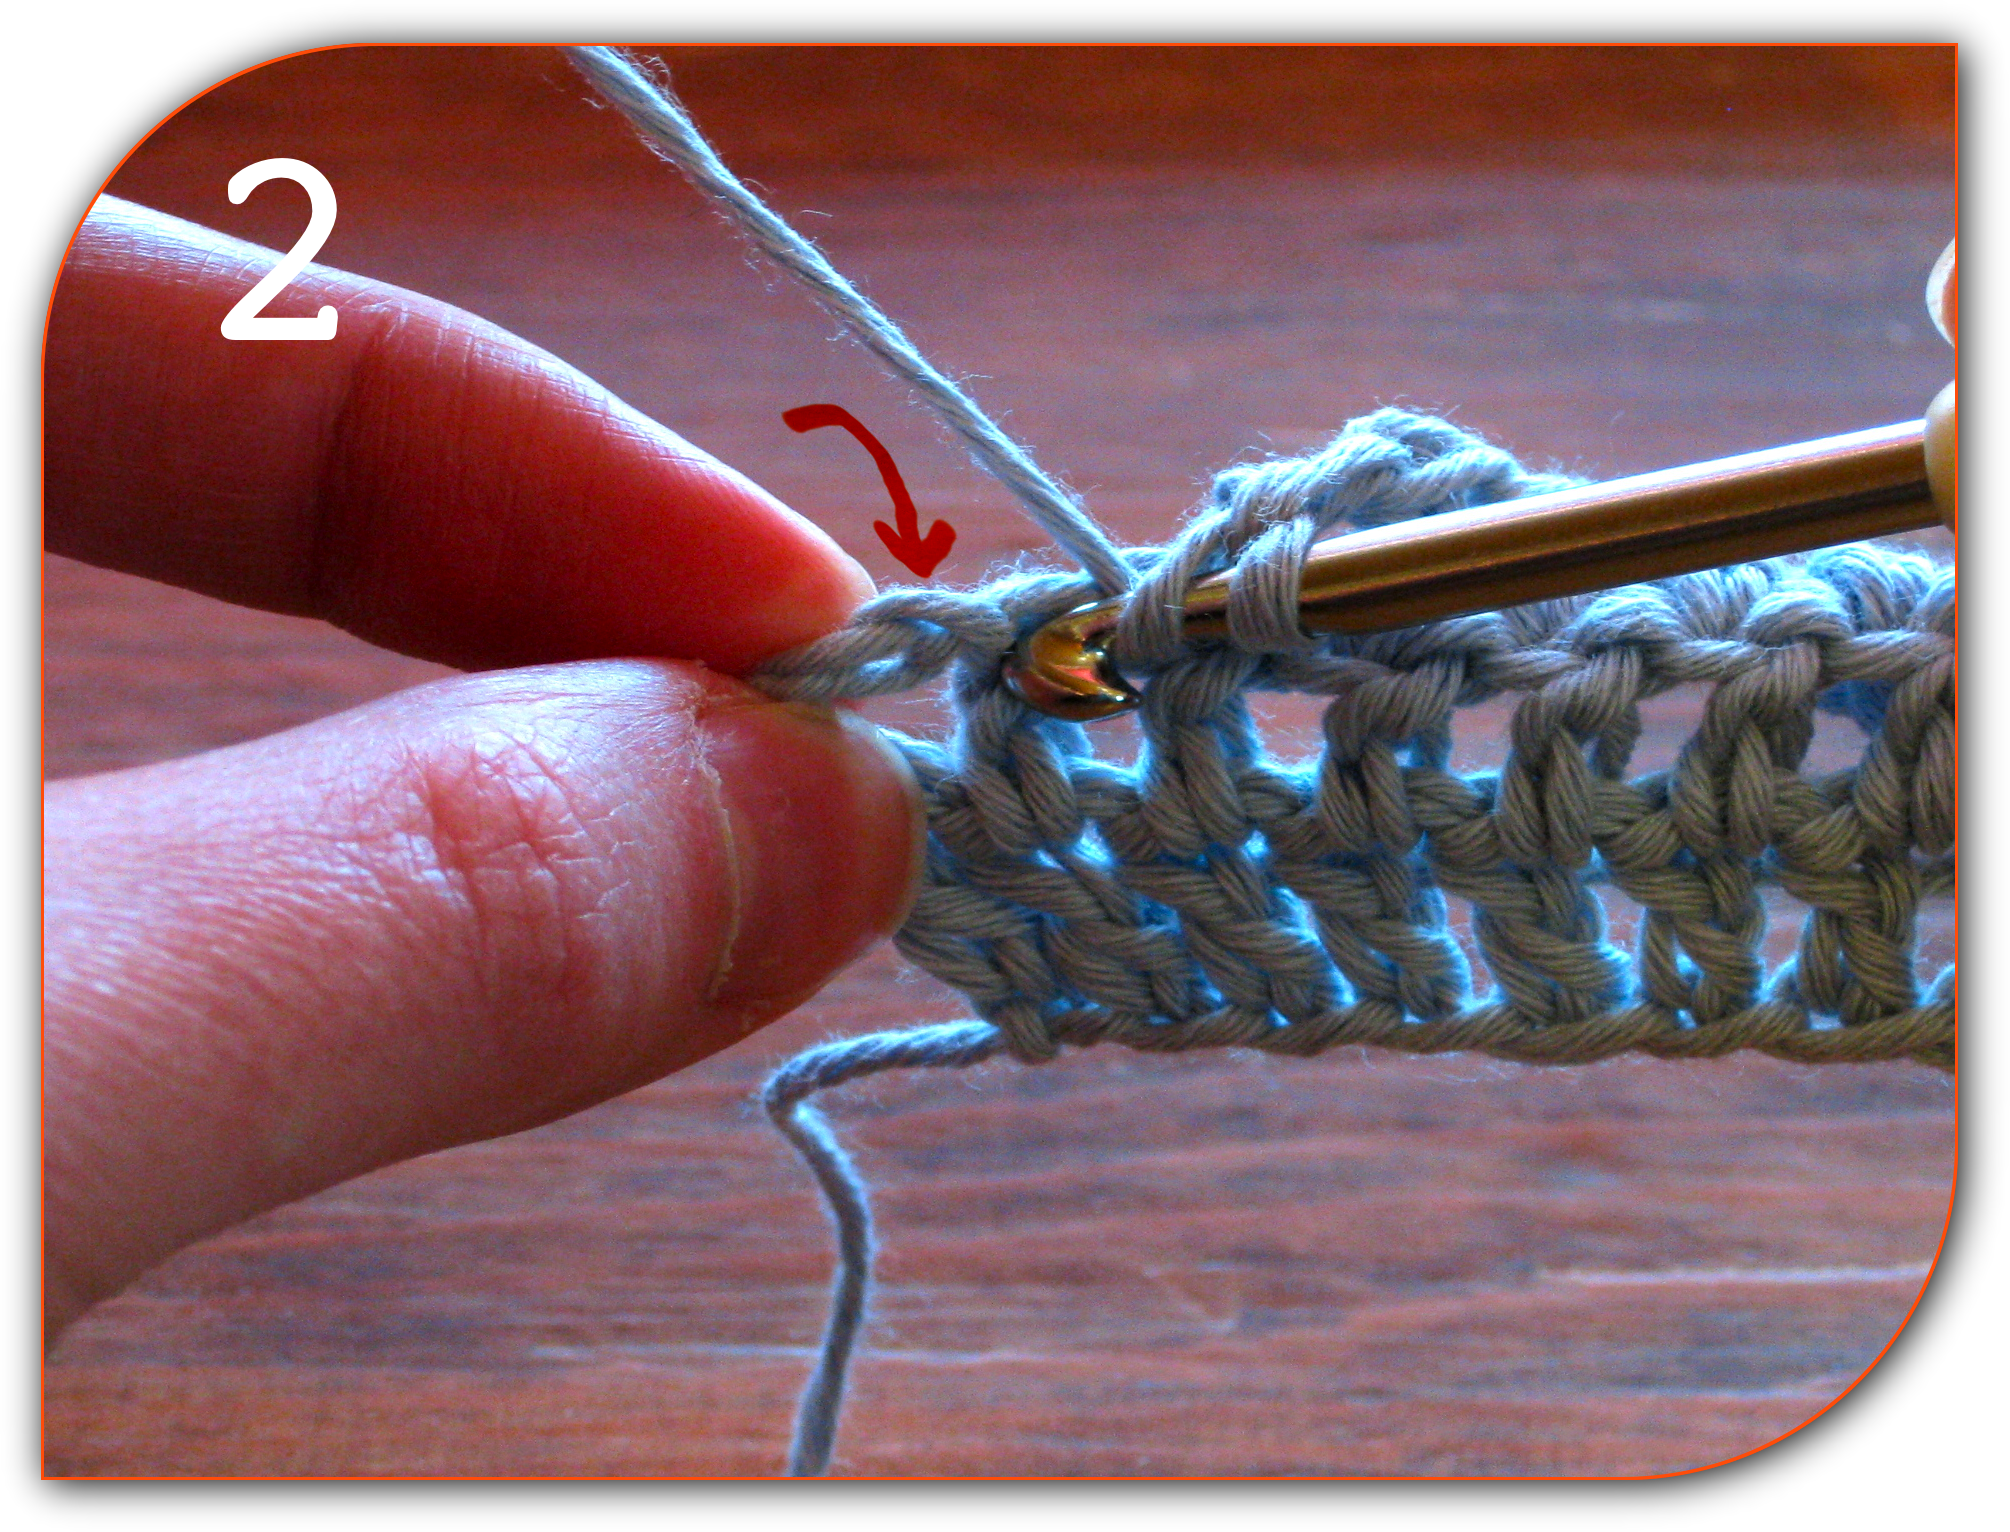 How To Make Neat Edges in Double Crochet